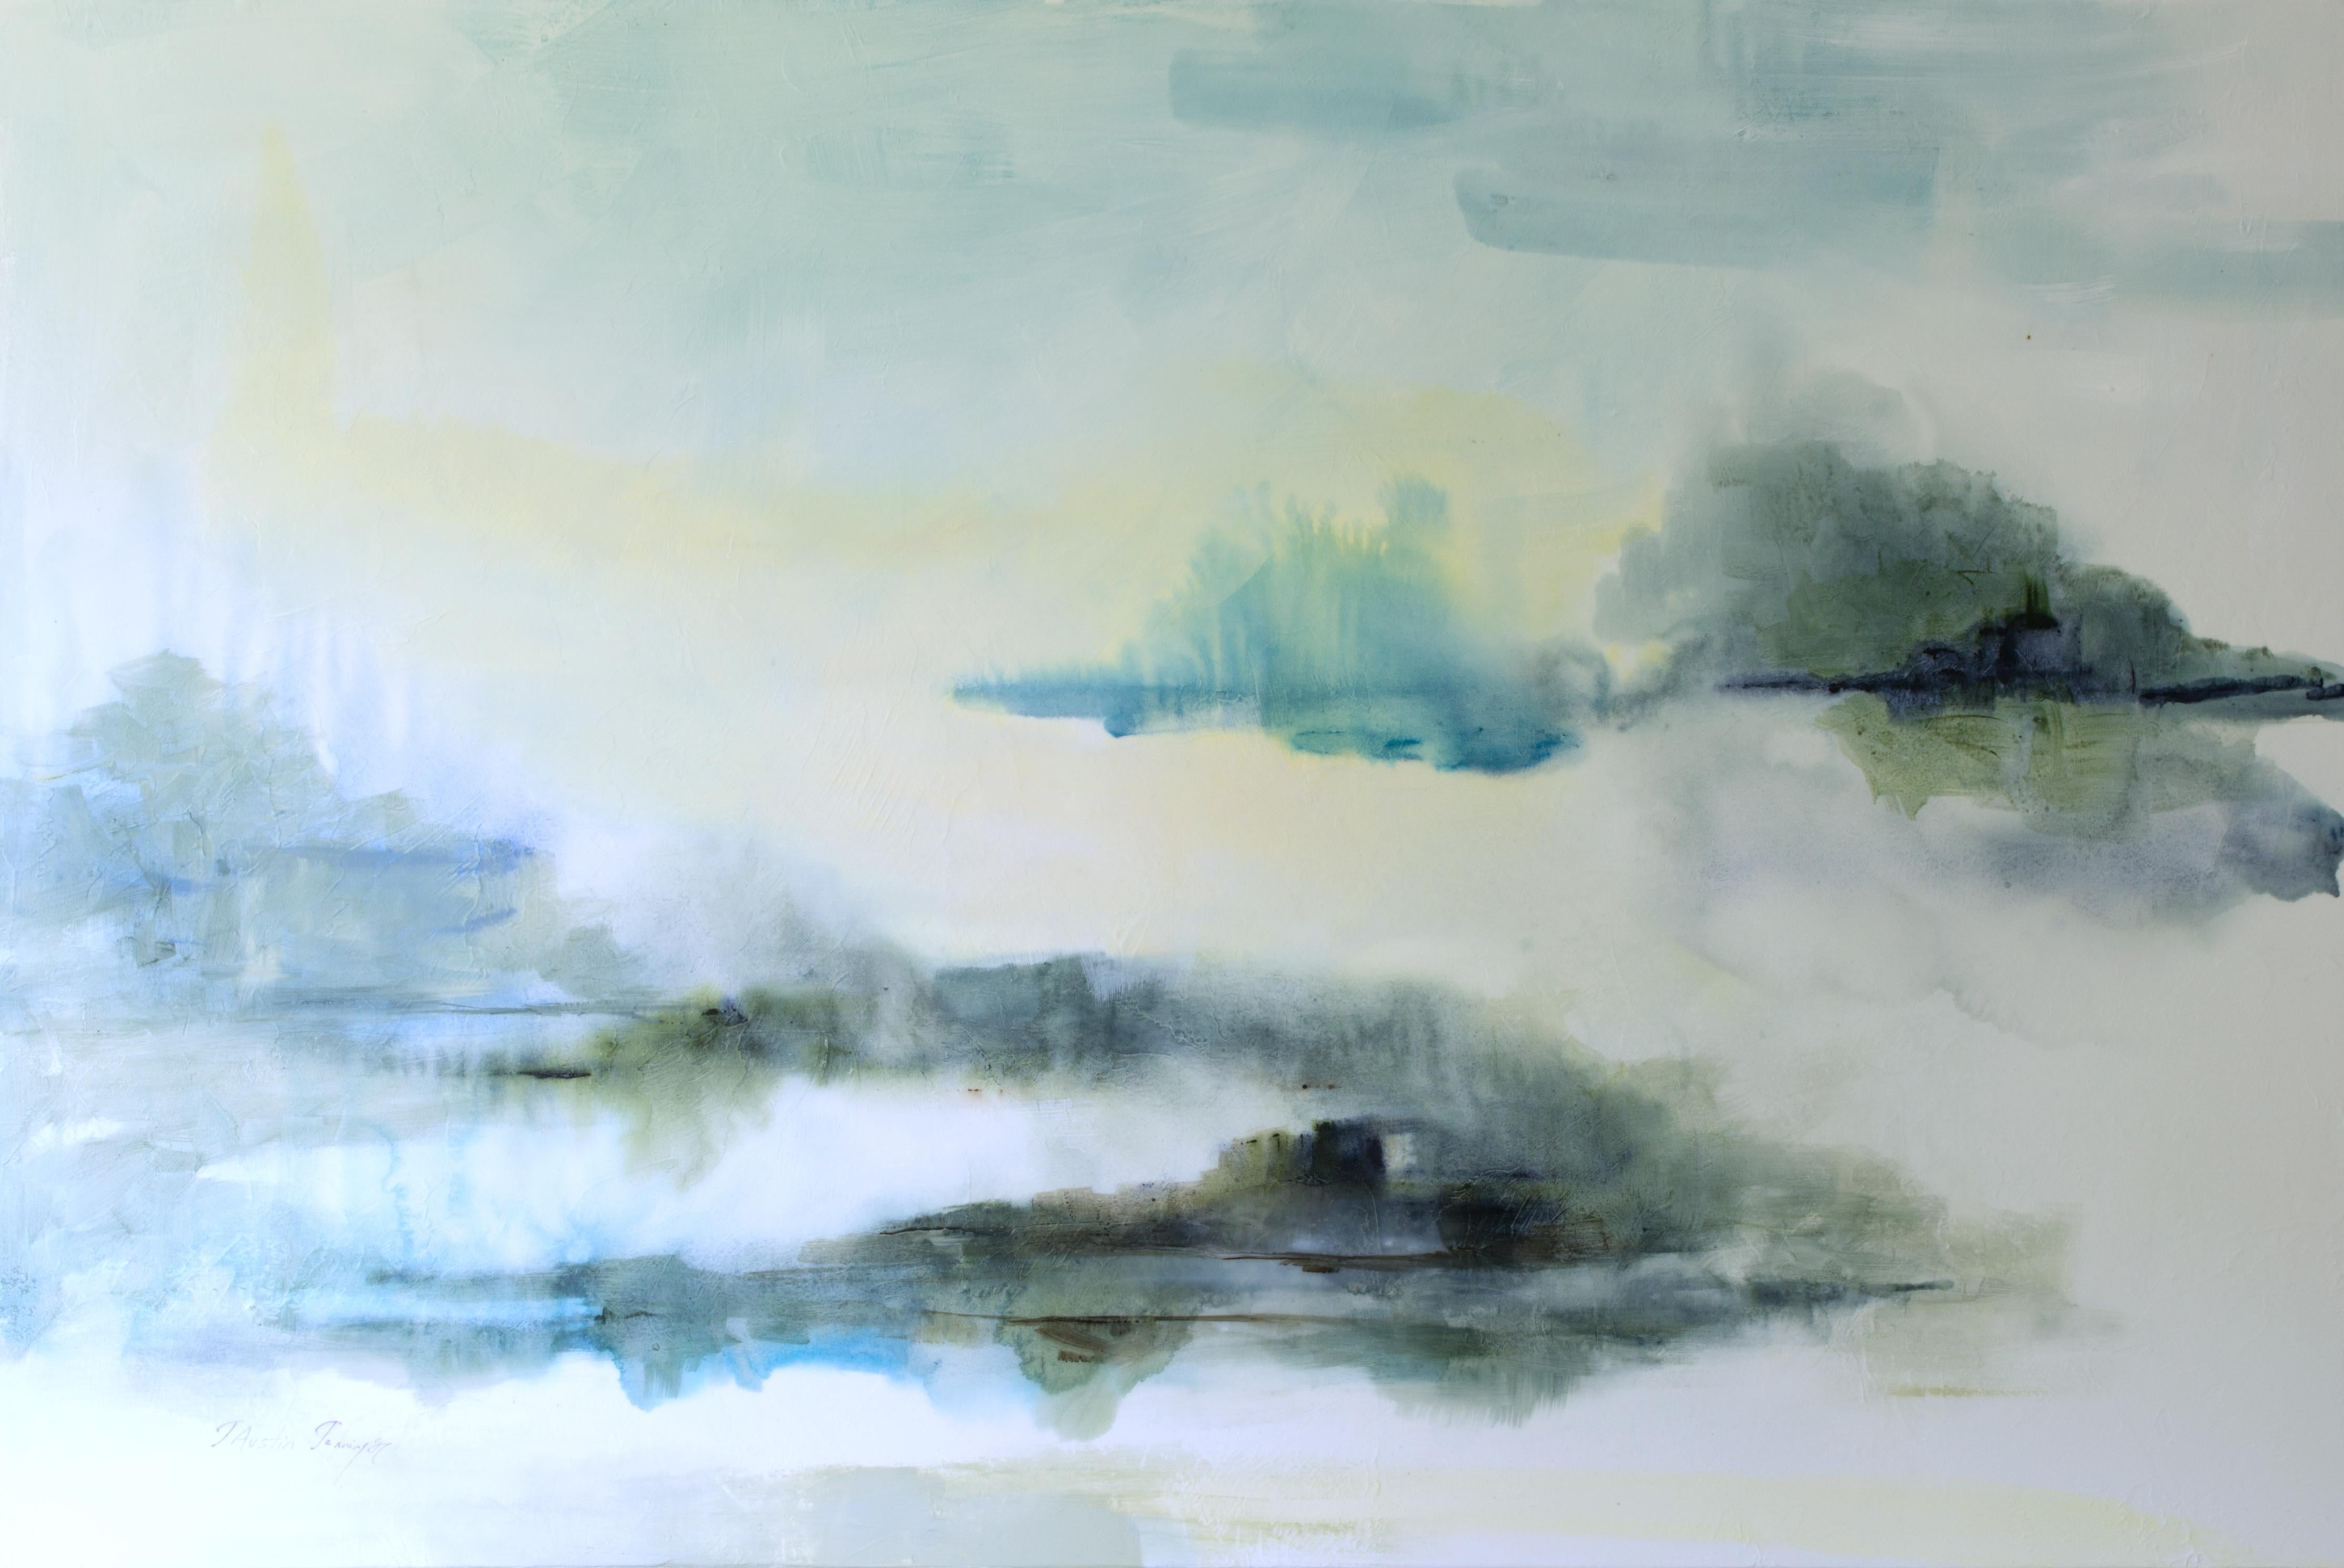 Jennifer Austin Jennings, a native of Dayton, Ohio has been an exhibiting artist and art educator for more than 25 years. Her close connection with nature provides inspiration for scenic and abstract compositions full of life and movement. 